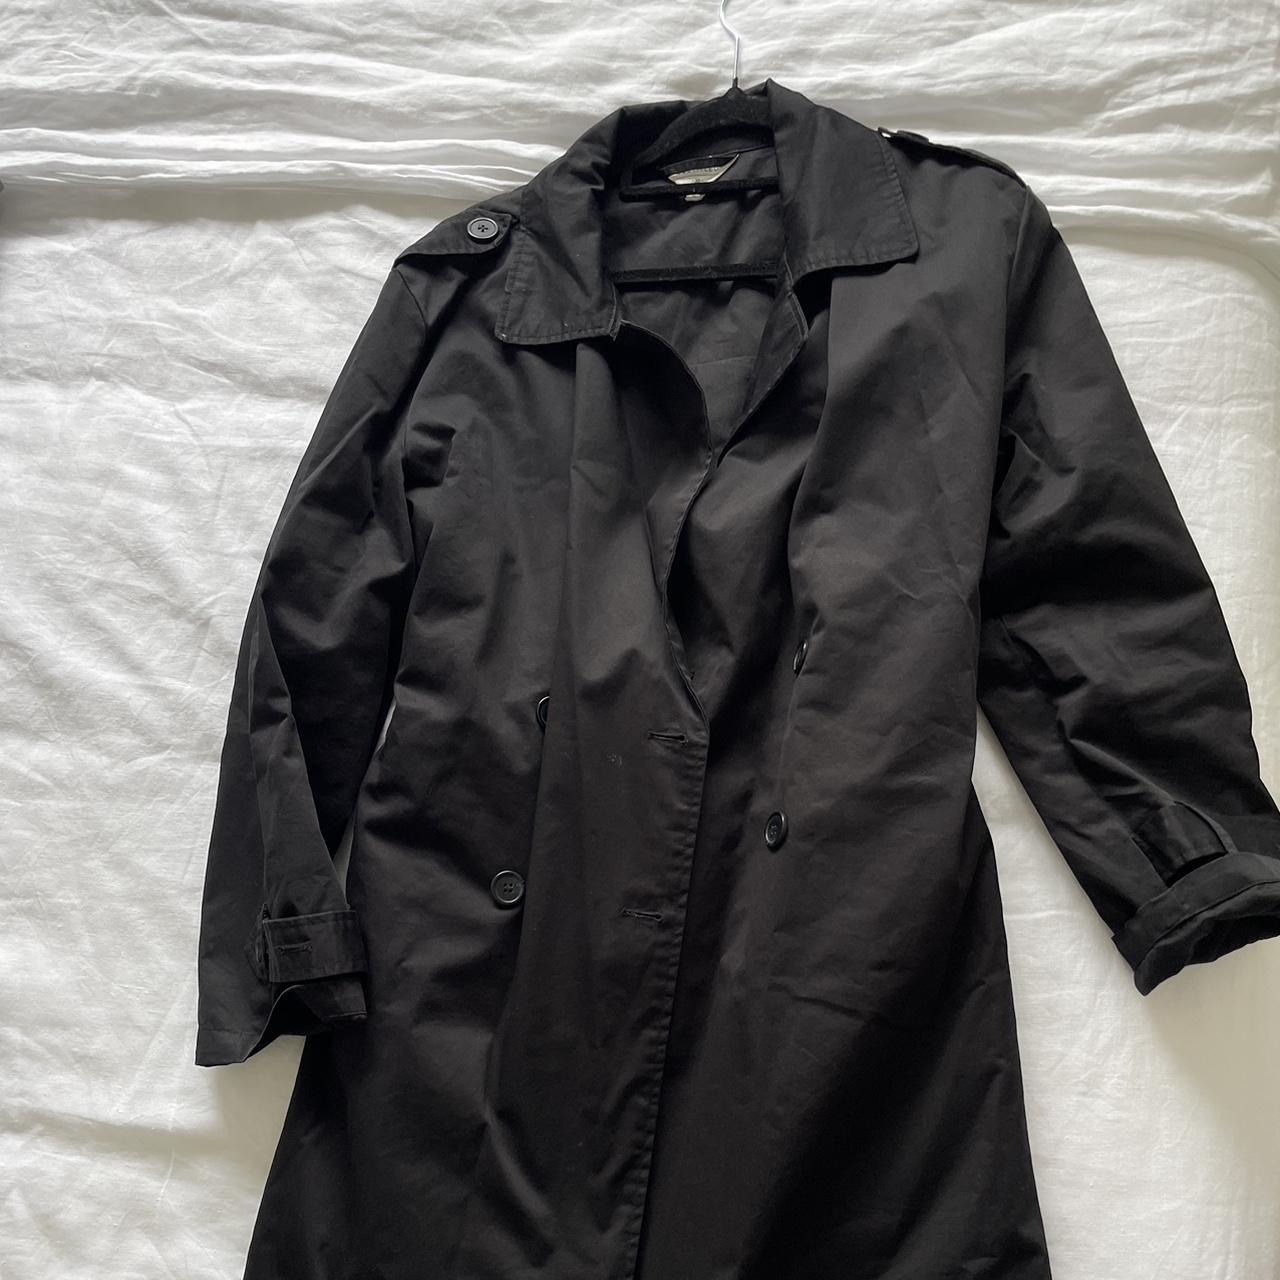 Black double breasted trench coat - Depop